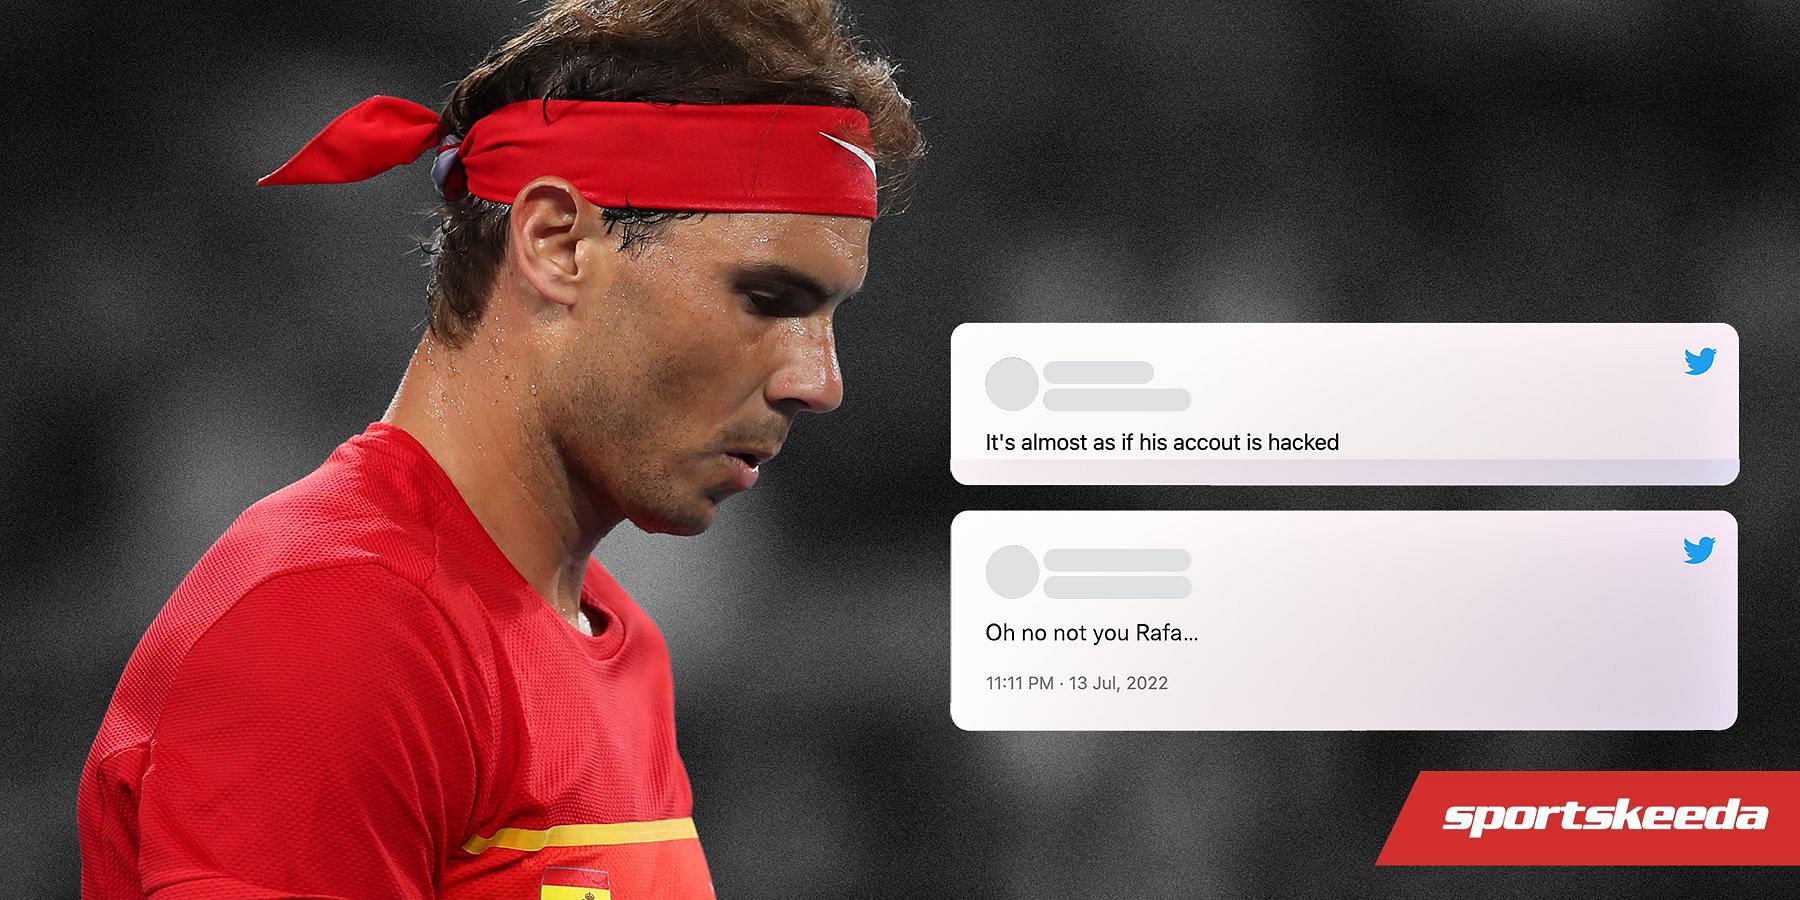 Rafael Nadal is facing criticism for promoting NFTs.